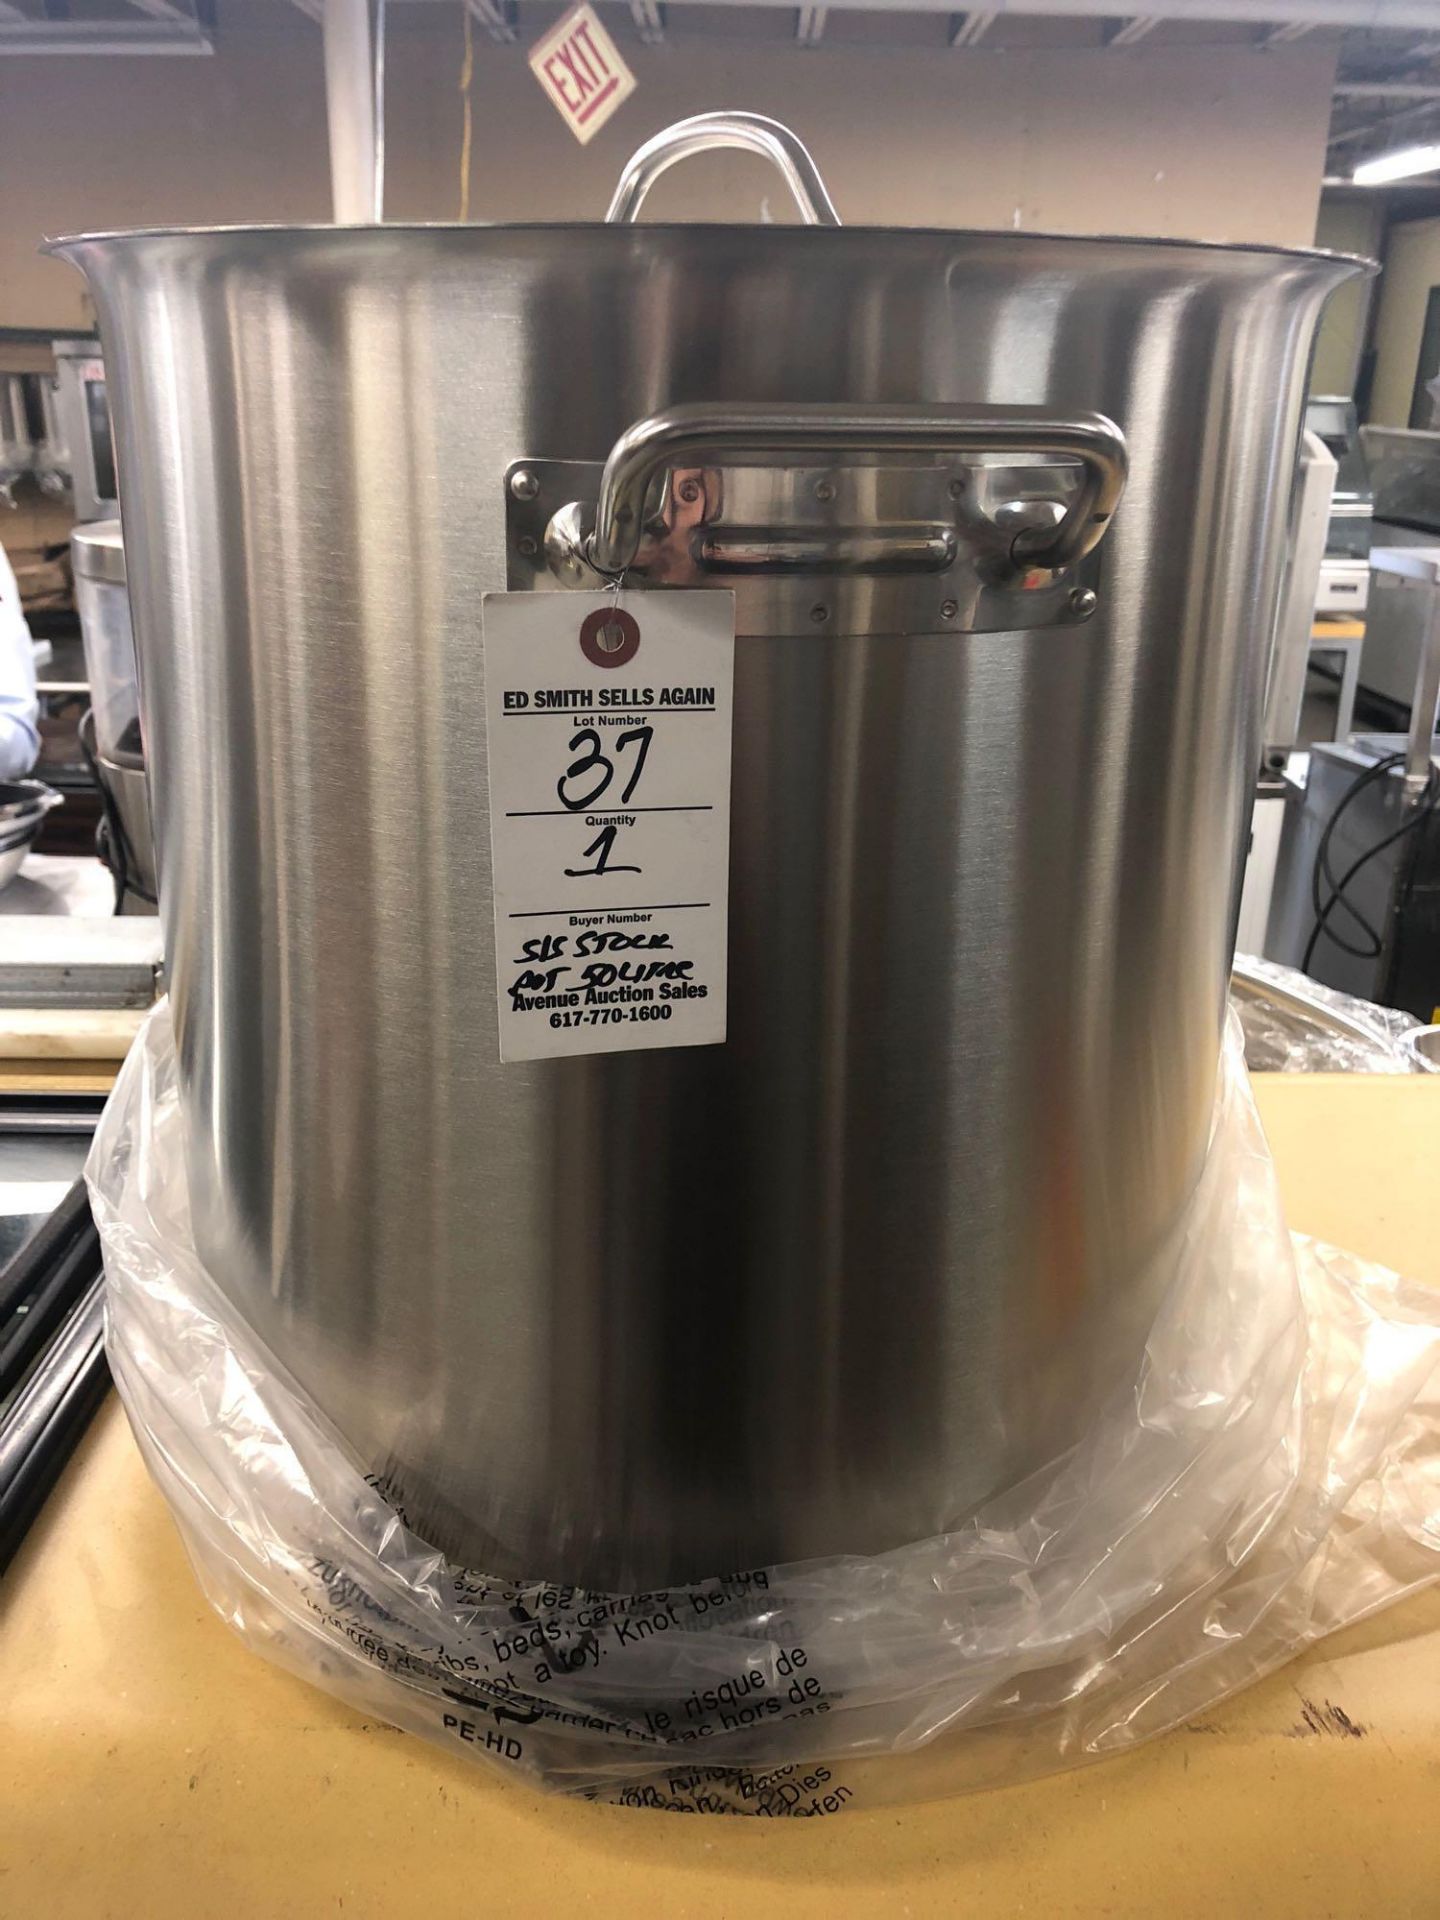 50 L stainless steel stockpot with cover